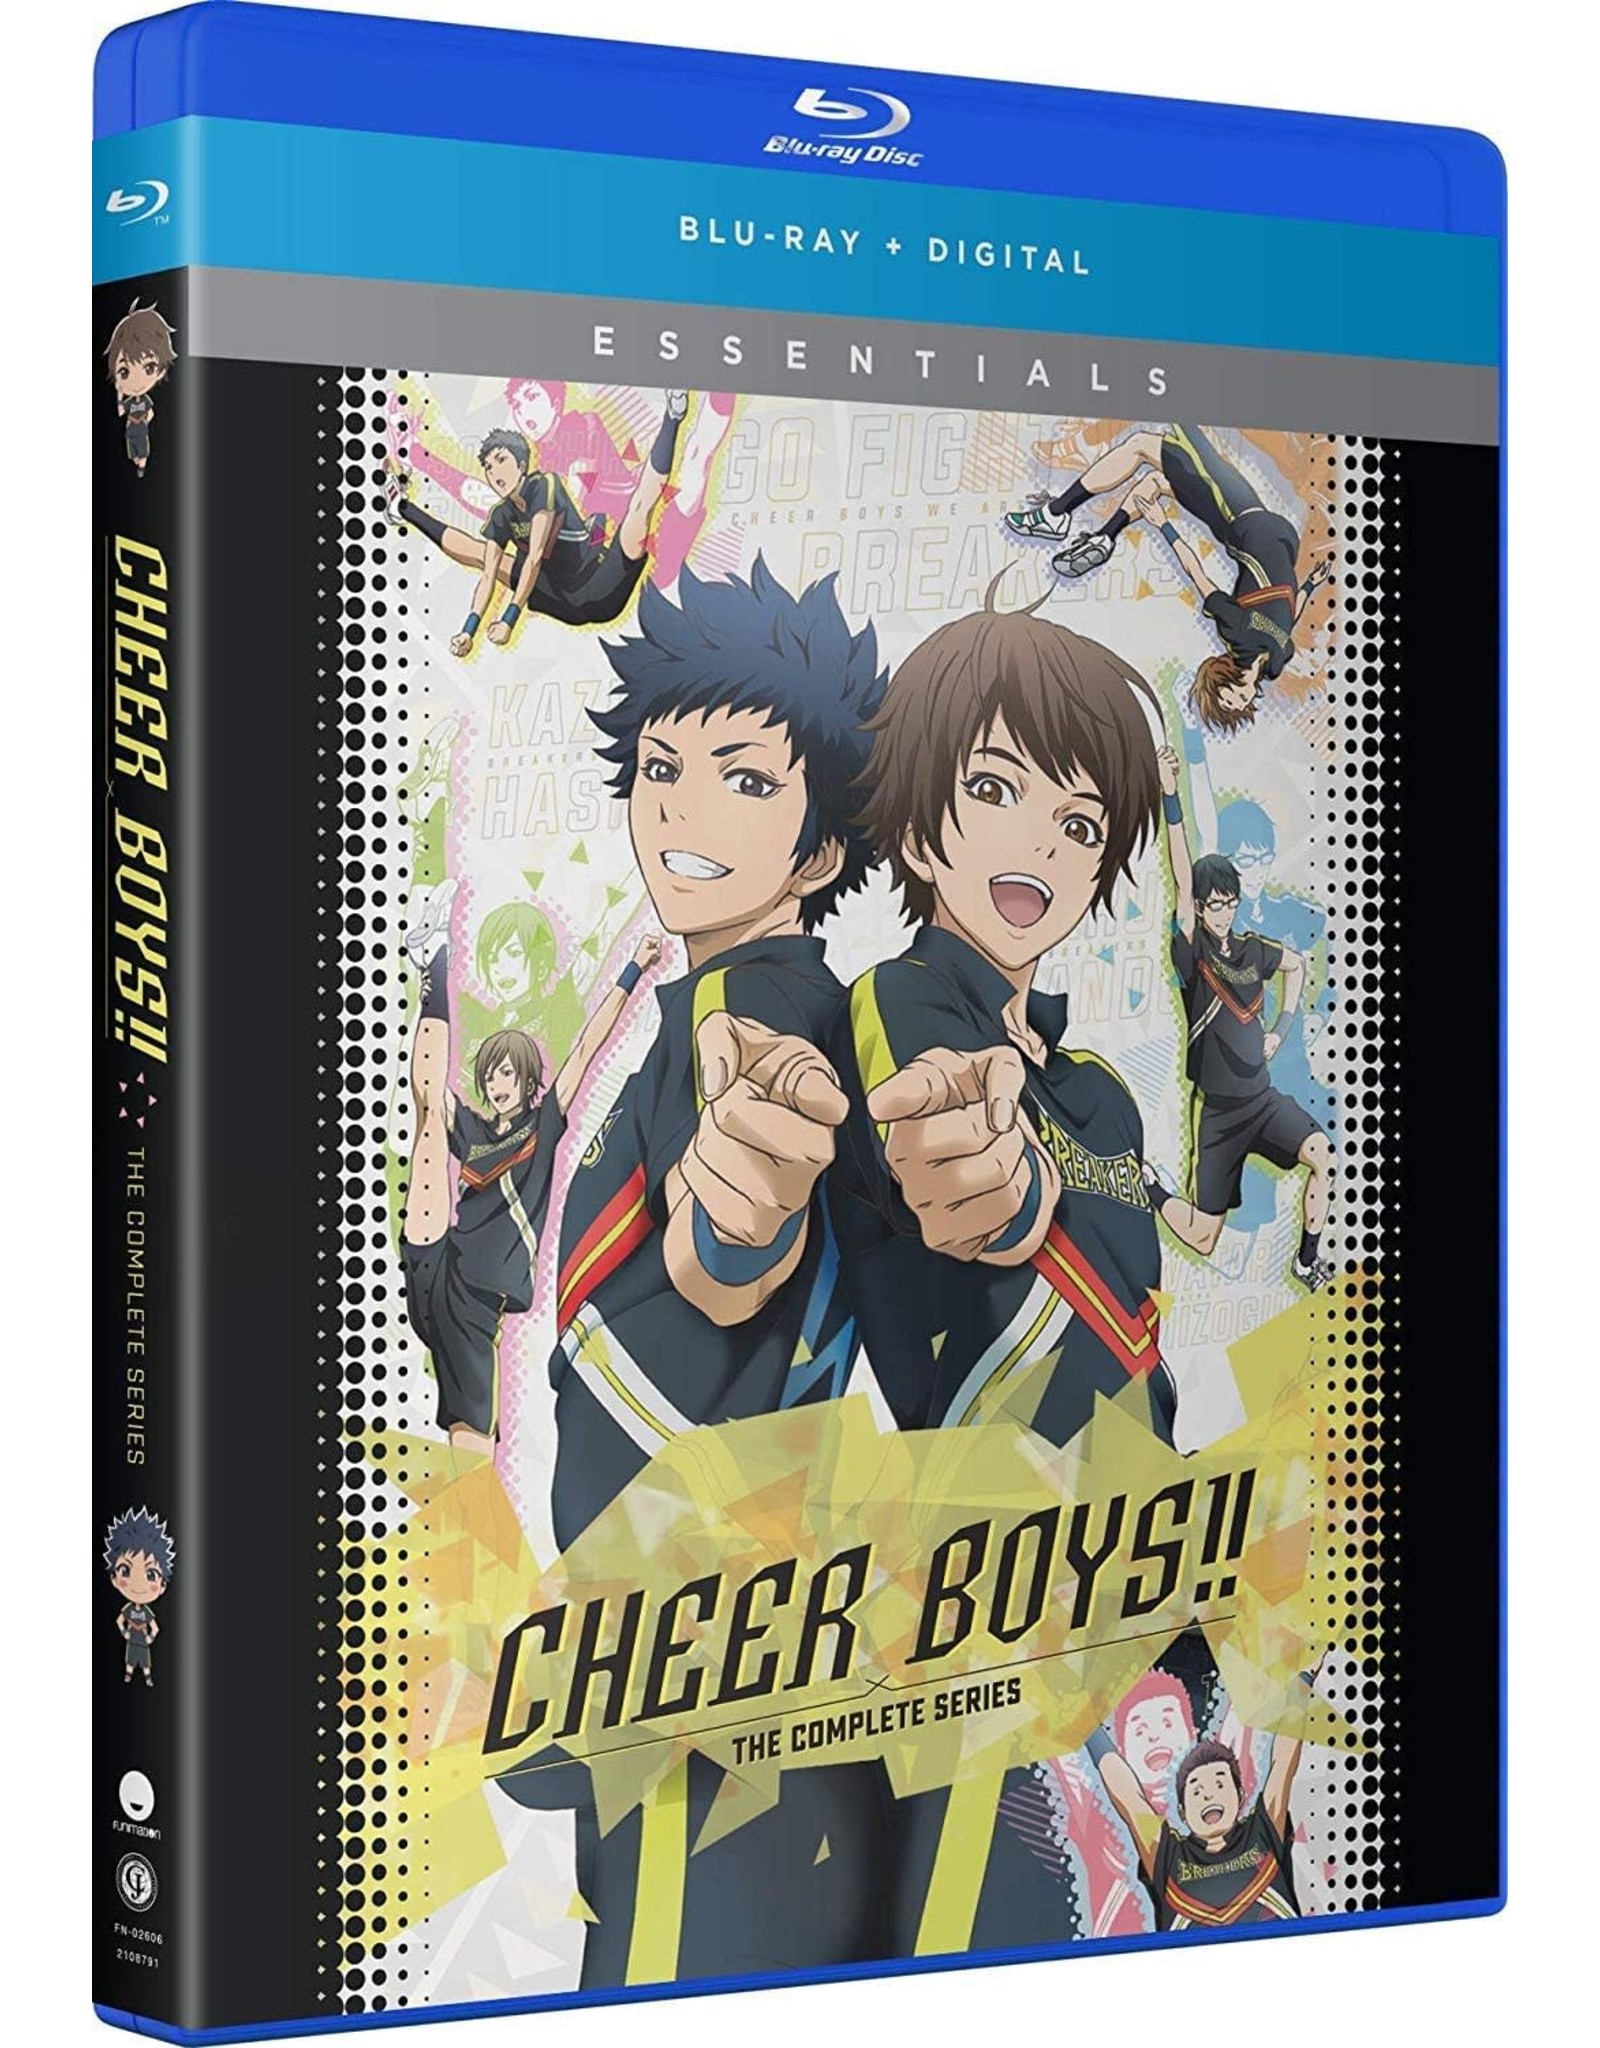 Anime Cheer Boys!! The Complete Series